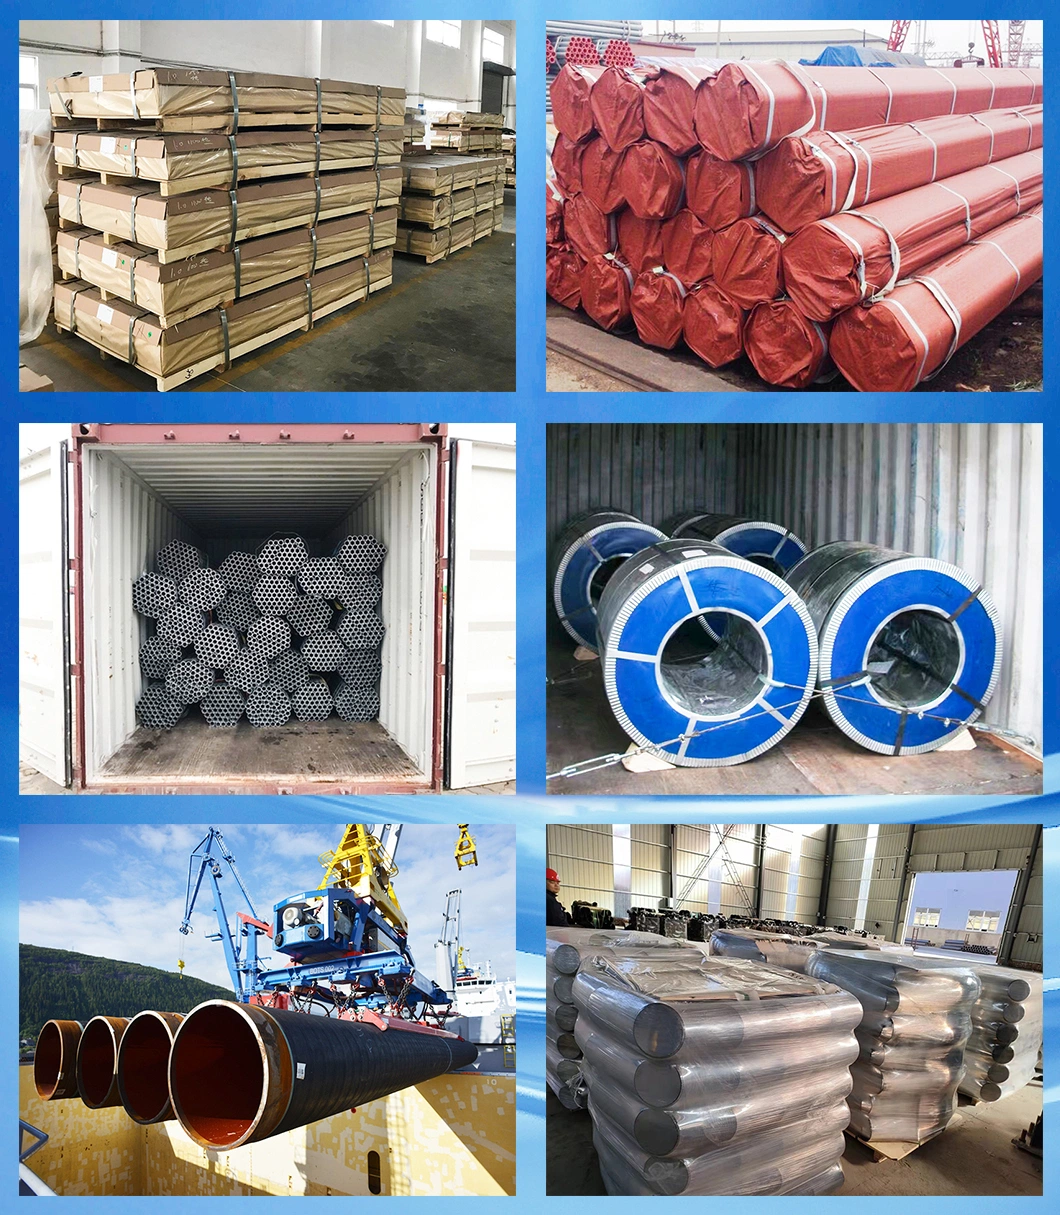 Hot Dipped Hollow Tube Pre Galvanized 6 Meter Customized Seamless / ERW / Welded Carbon Steel Square / Round Pipe for Greenhouse